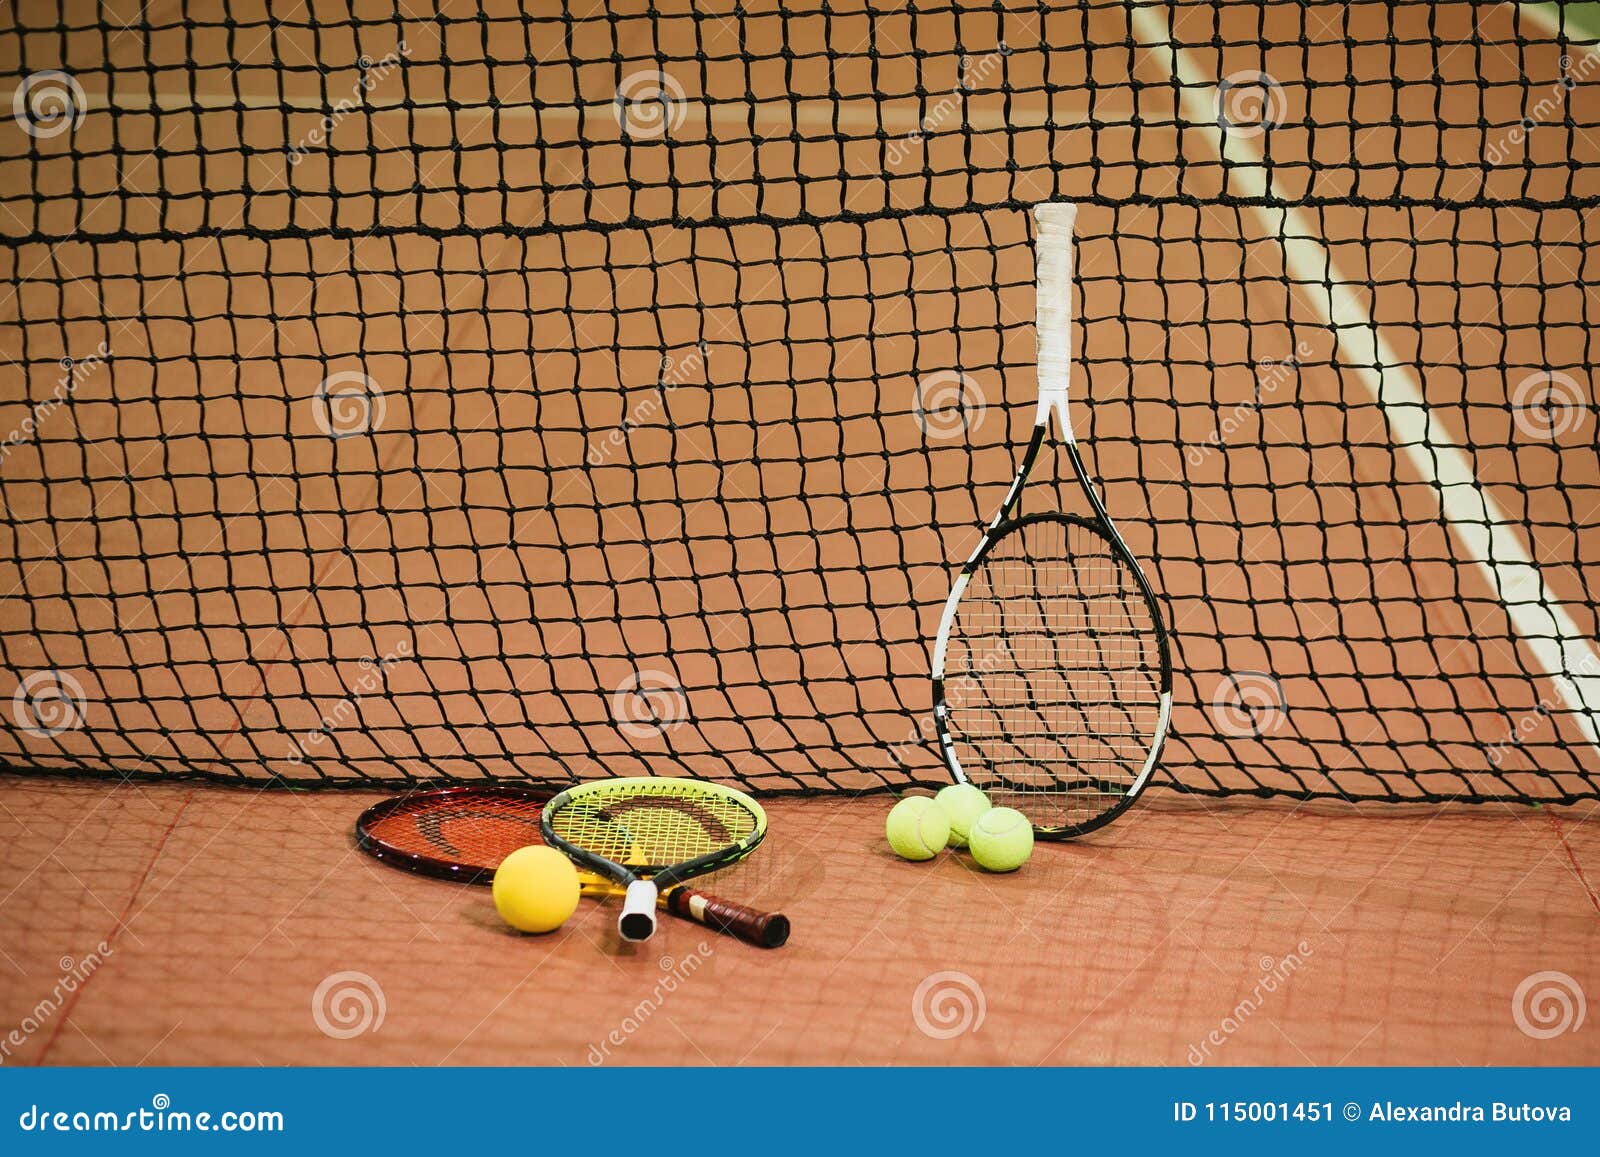 three tennis rackets and balls on the indoor court